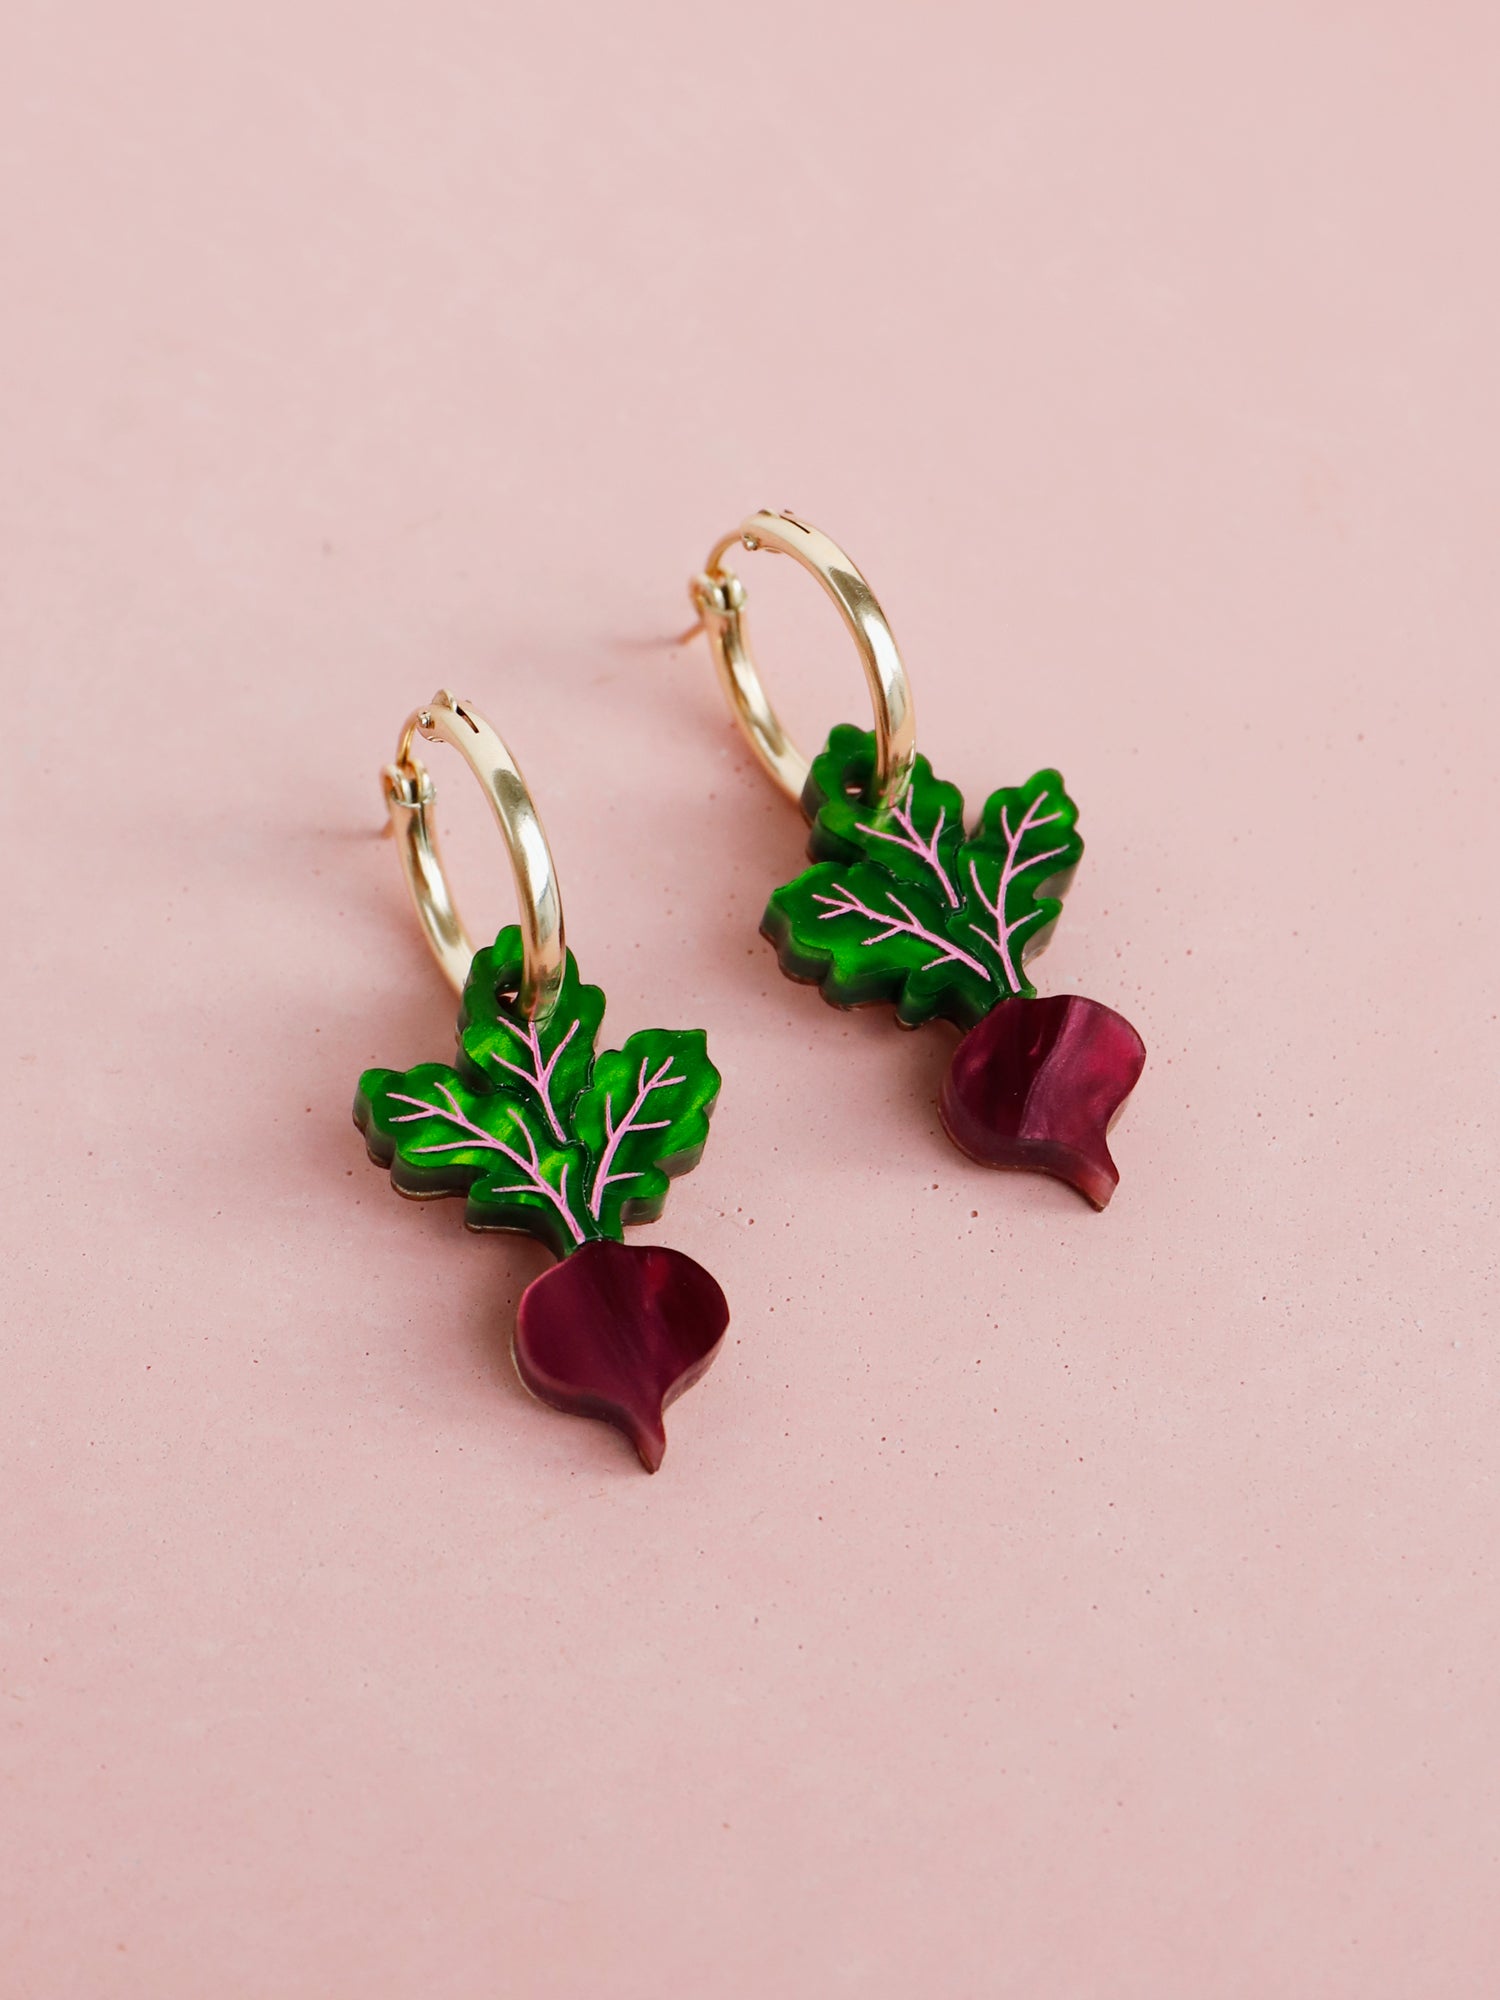 Purple and green hand-inked beetroot acrylic mini charms with optional gold-filled hoops. Handmade in London by Wolf & Moon.